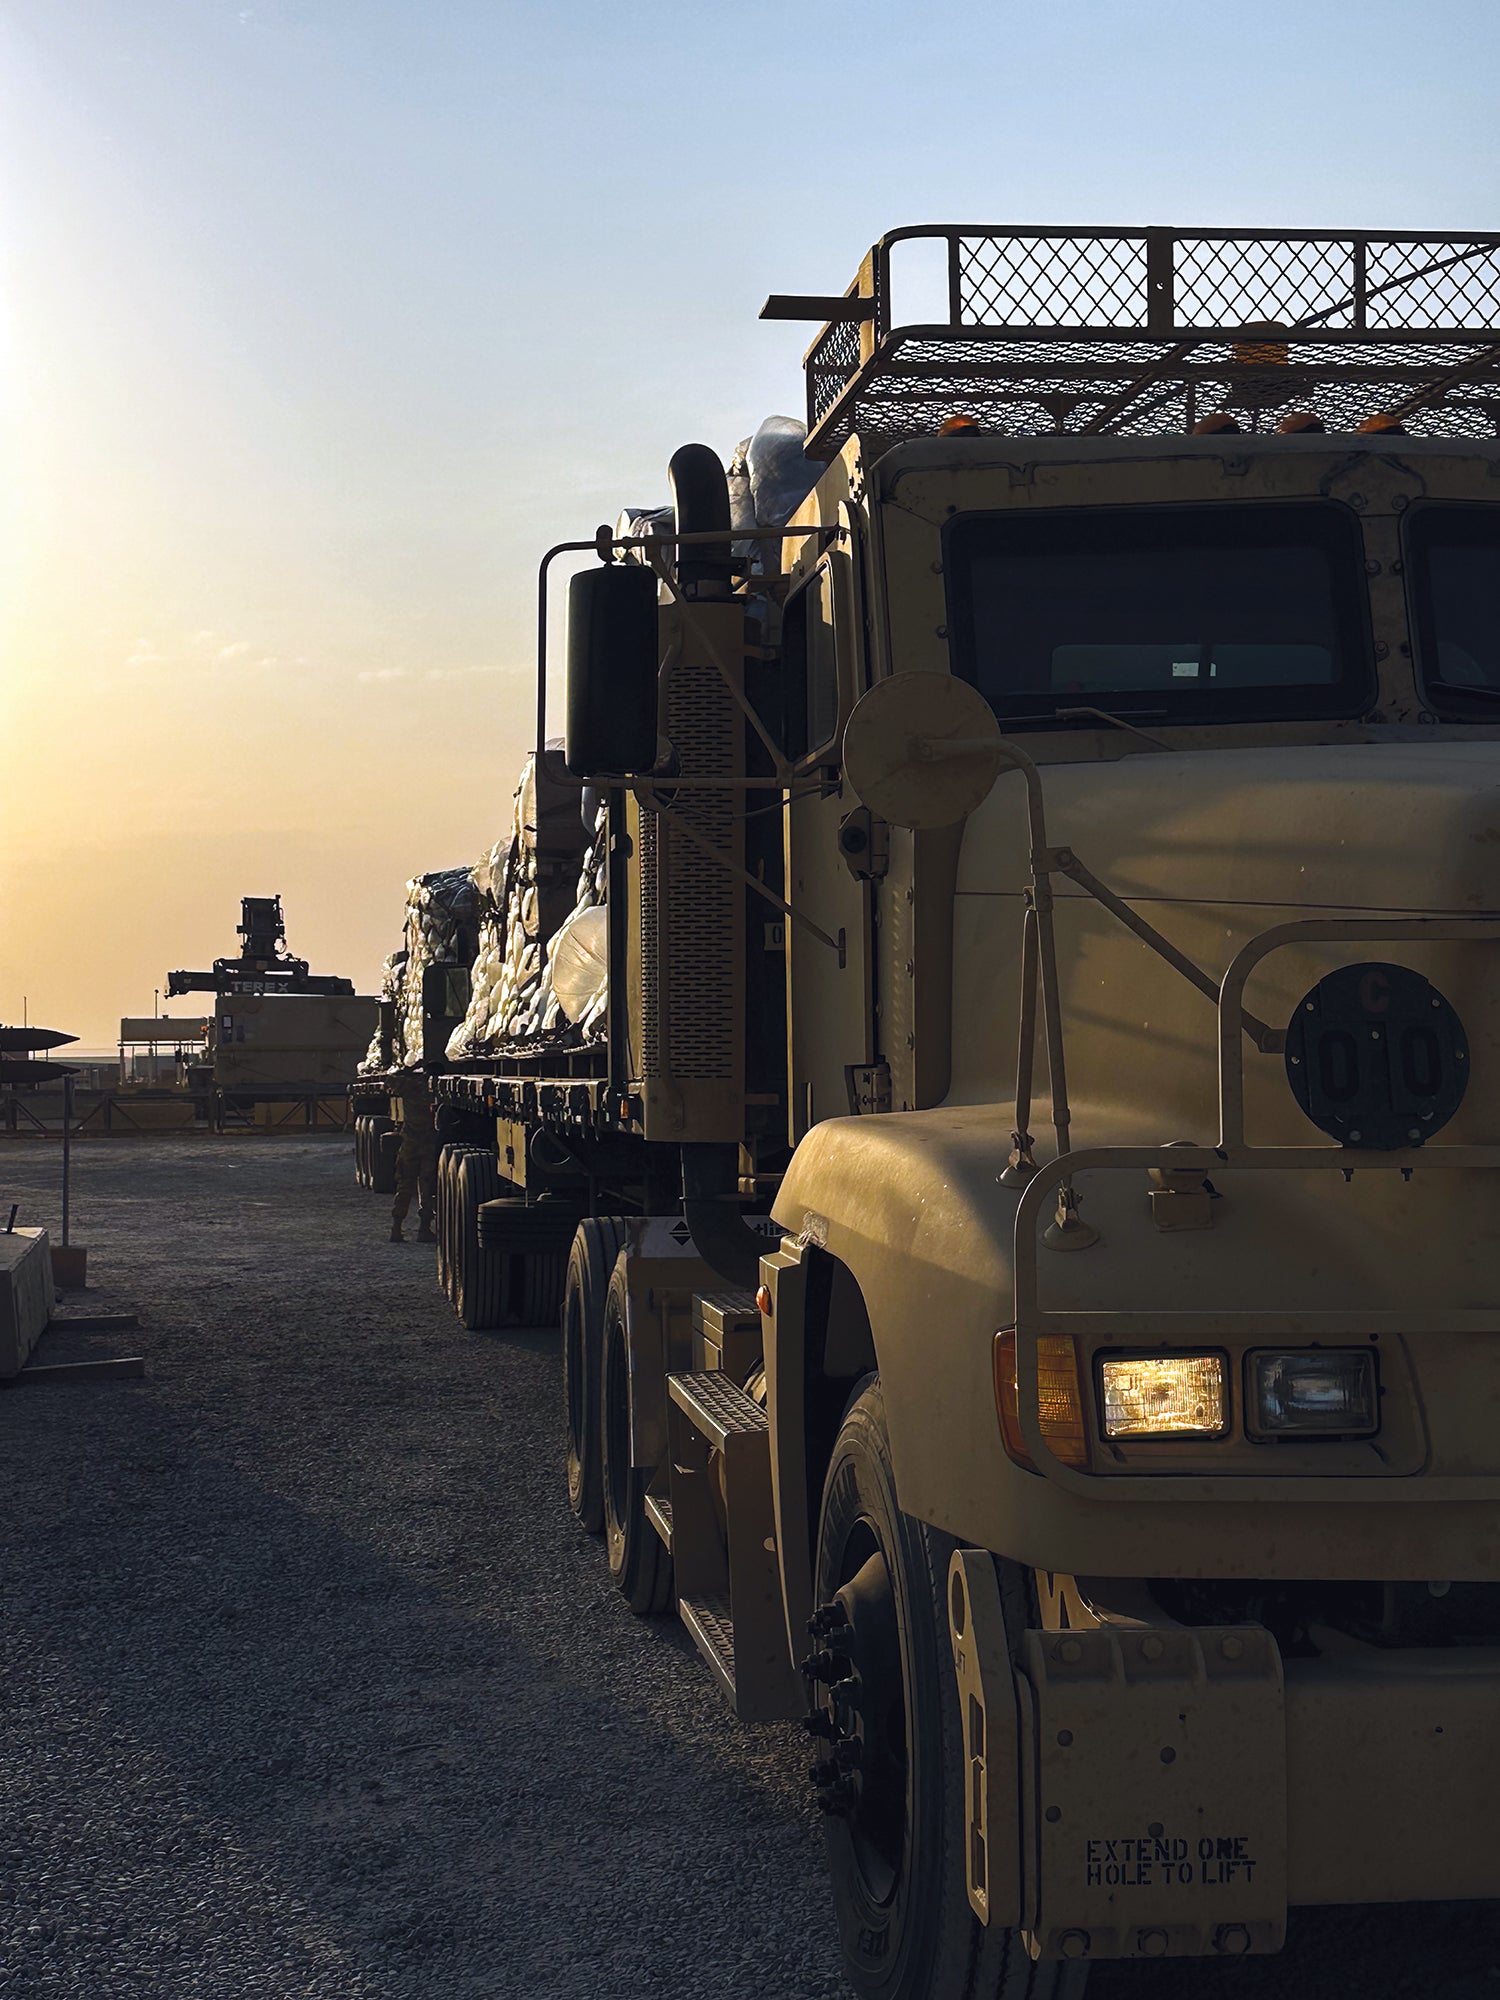 An Army Palletized Load System is used to move supplies to troops deployed at an undisclosed location. (Credit: U.S. Army/Sgt. Tanner Dibble)